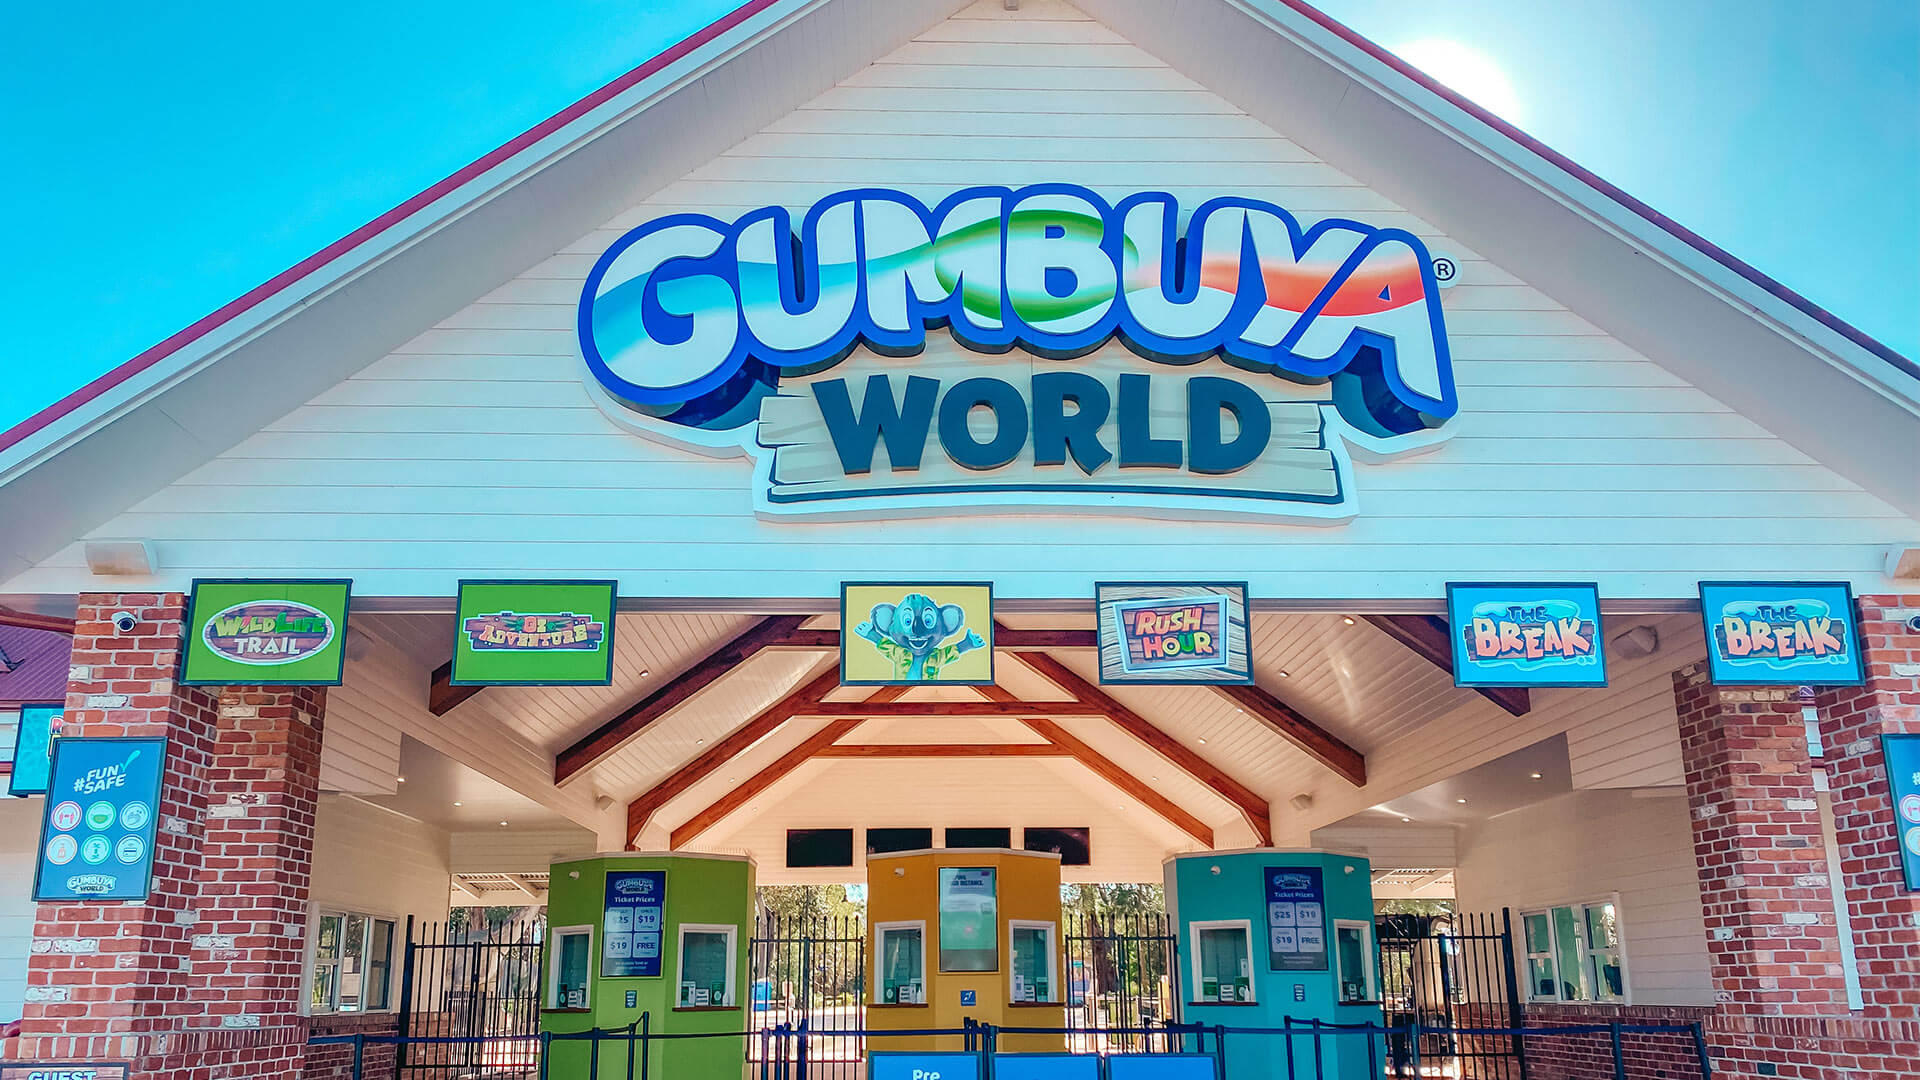 Welcome to the Gumbuya World